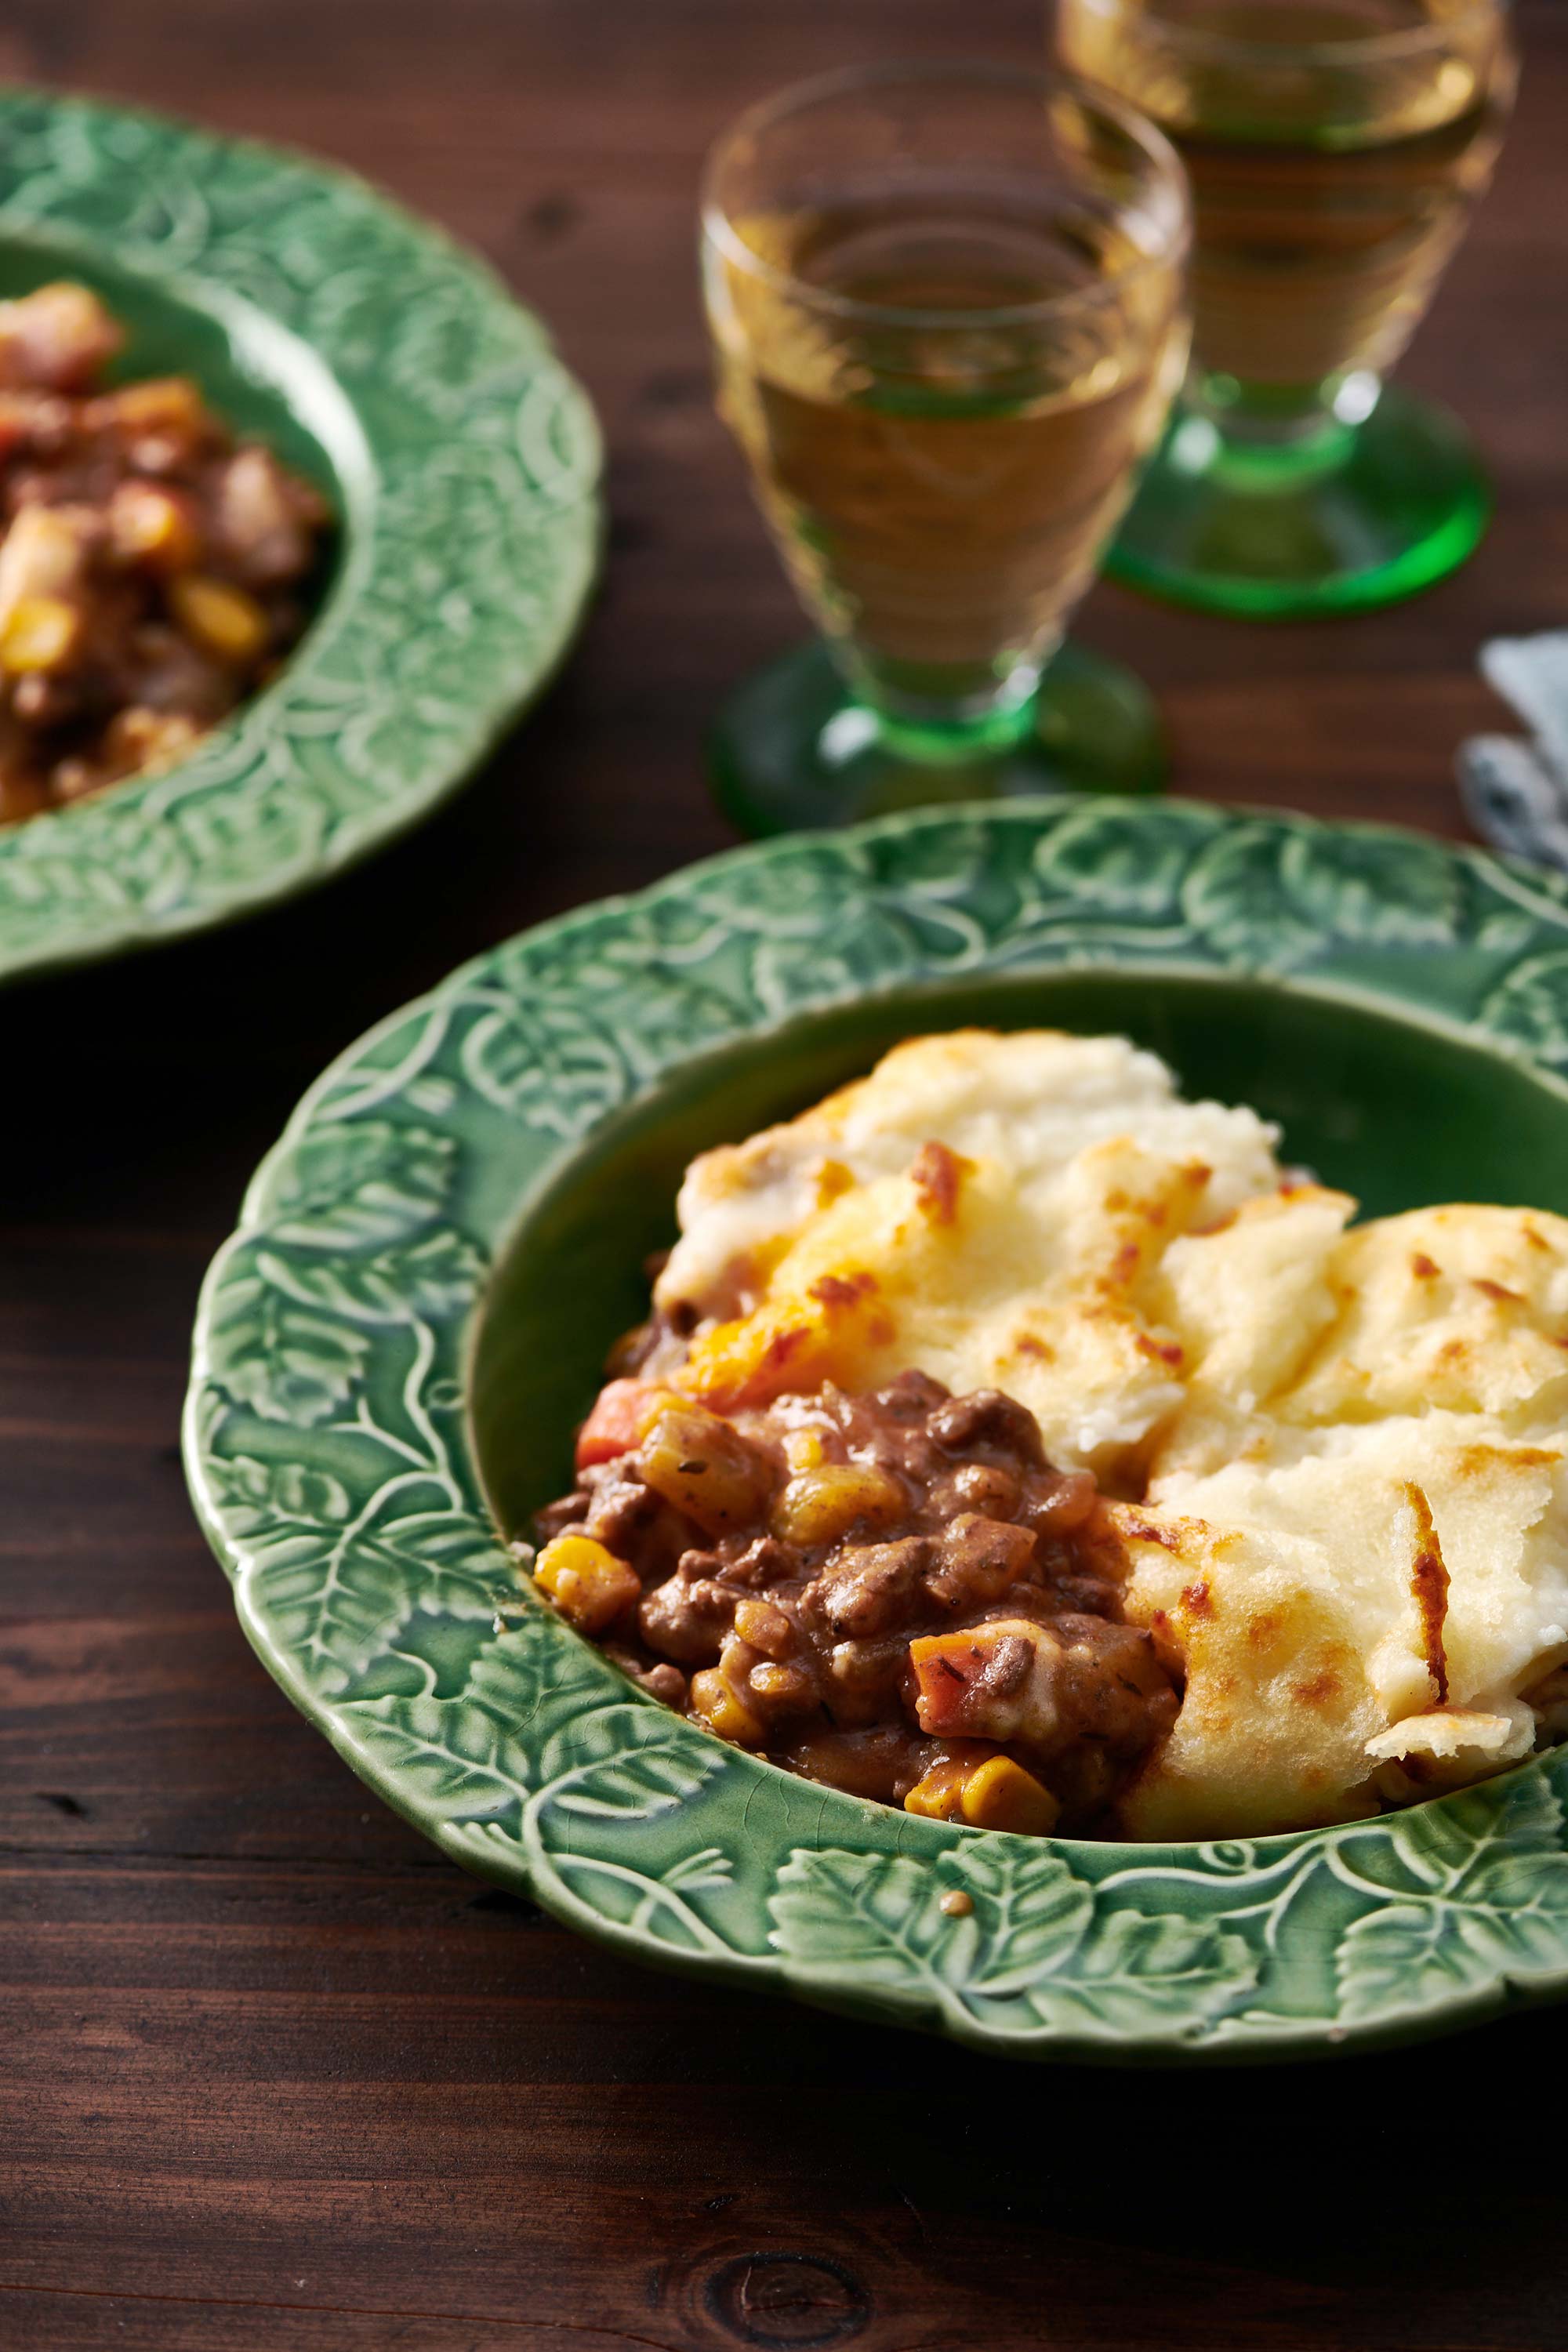 Two bowls of Cottage Pie on a wooden table.